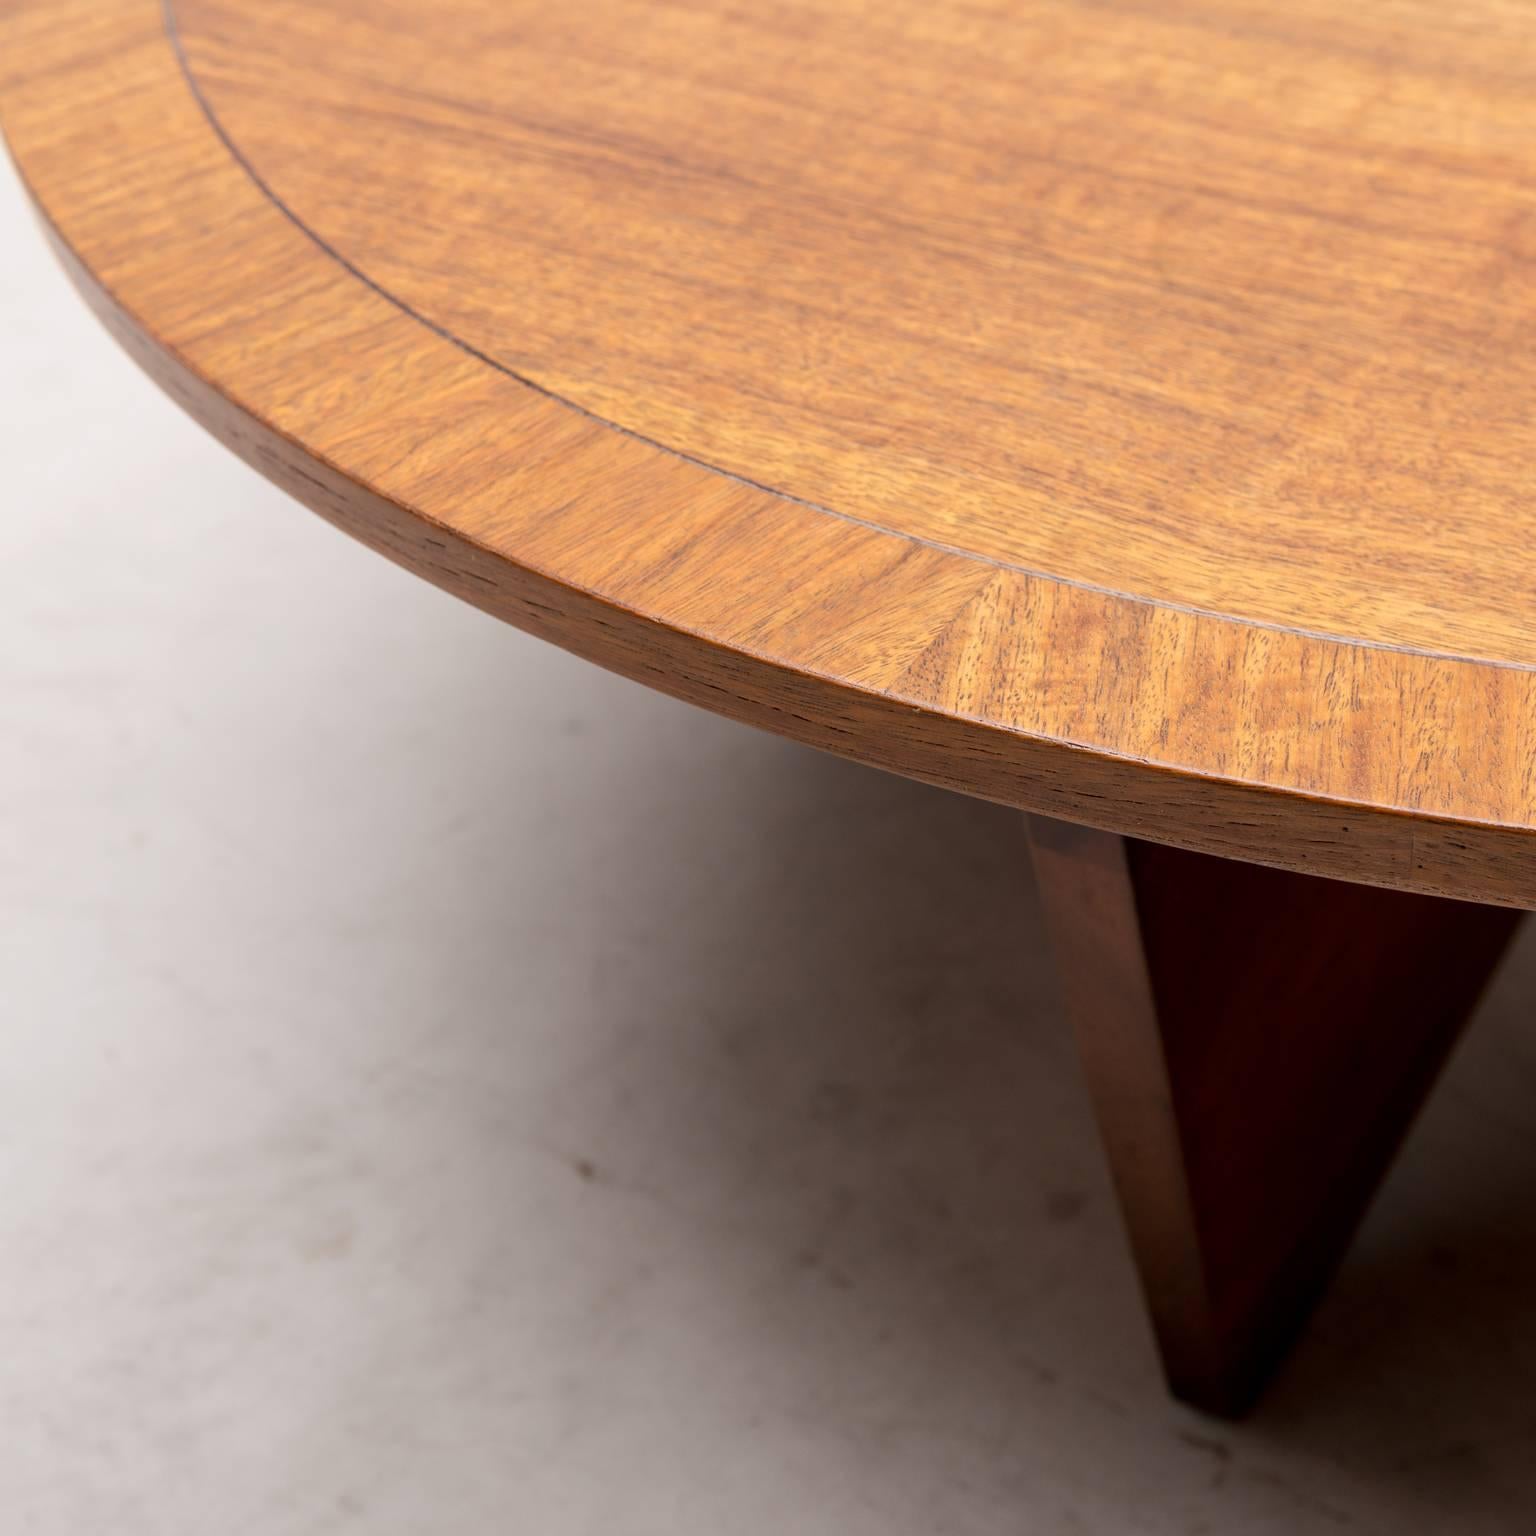 Mid-20th Century Rare George Nakashima Coffee Table in Laurel and Walnut for Widdicomb, 1962